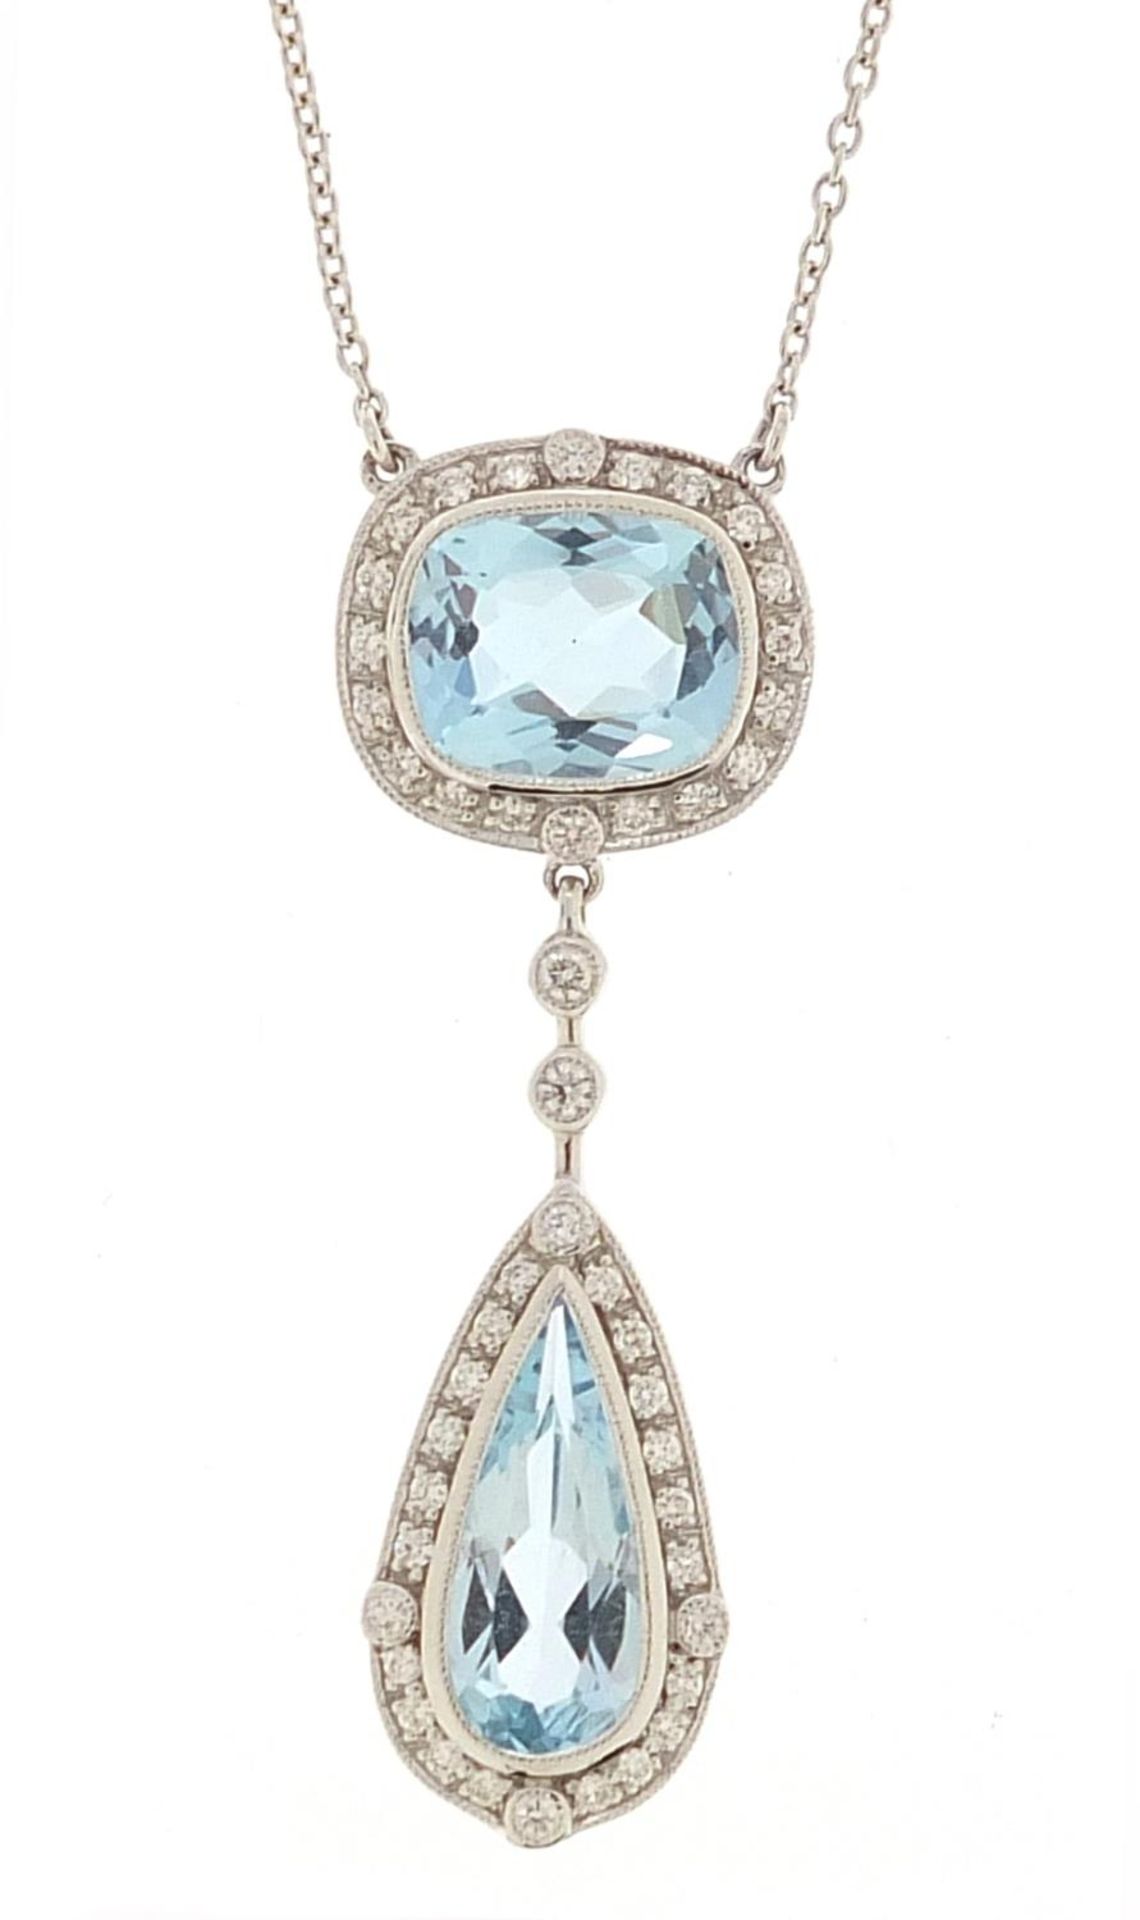 Art Deco style 18ct white gold blue topaz and diamond necklace, total topaz weight approximately 5.